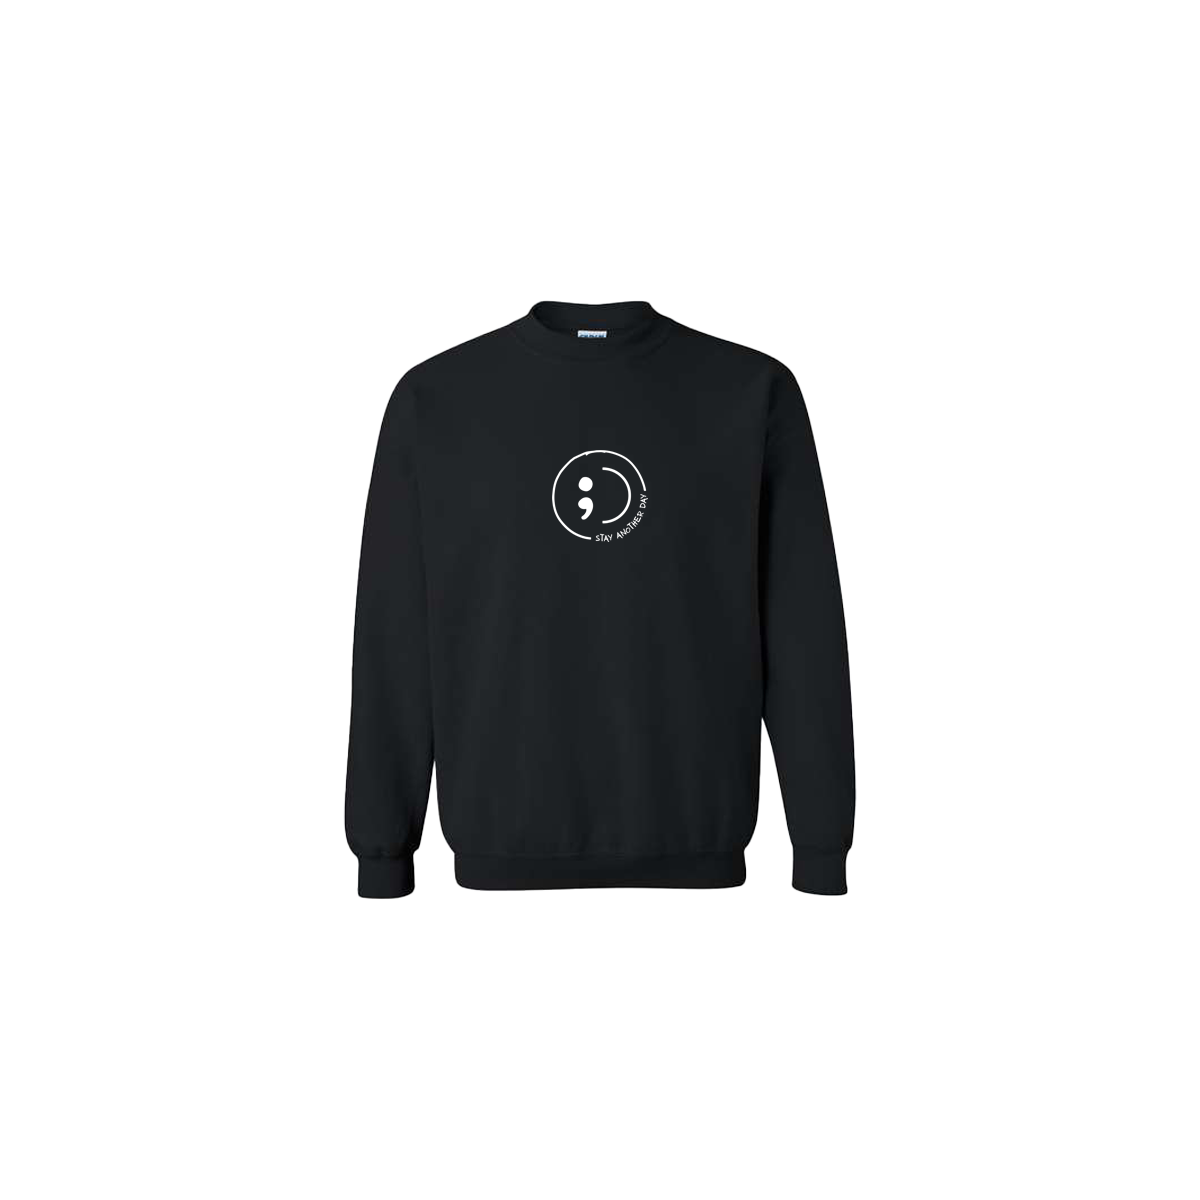 Stay Another Day Smiley with text Embroidered Black Crewneck - Mental Health Awareness Clothing